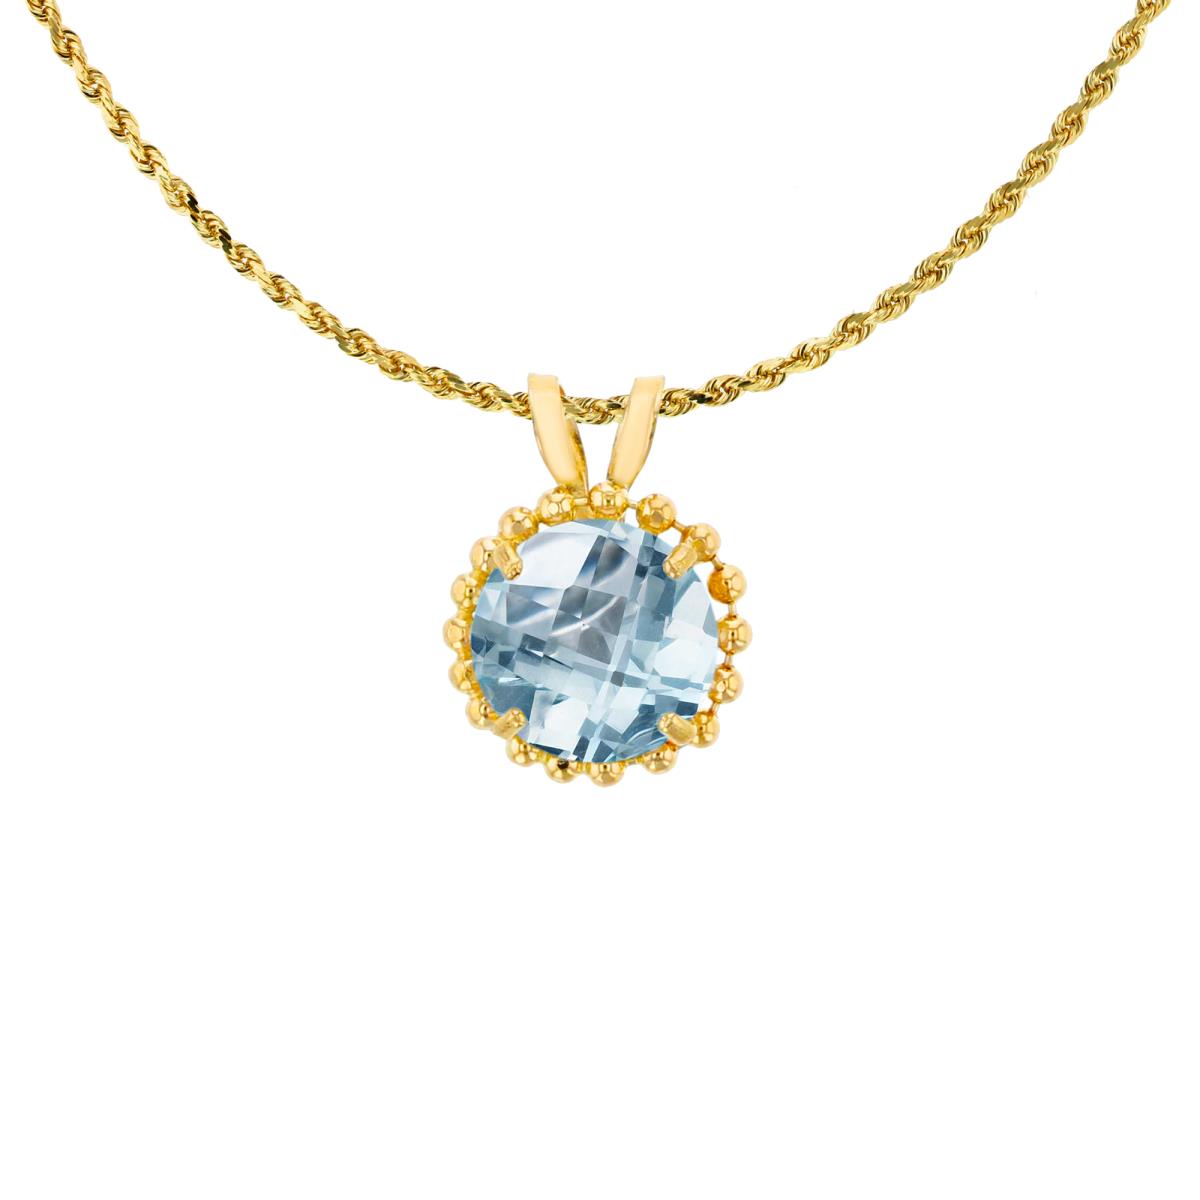 14K Yellow Gold 6mm Rd Cut Aquamarine with Bead Frame Rabbit Ear 18" Necklace